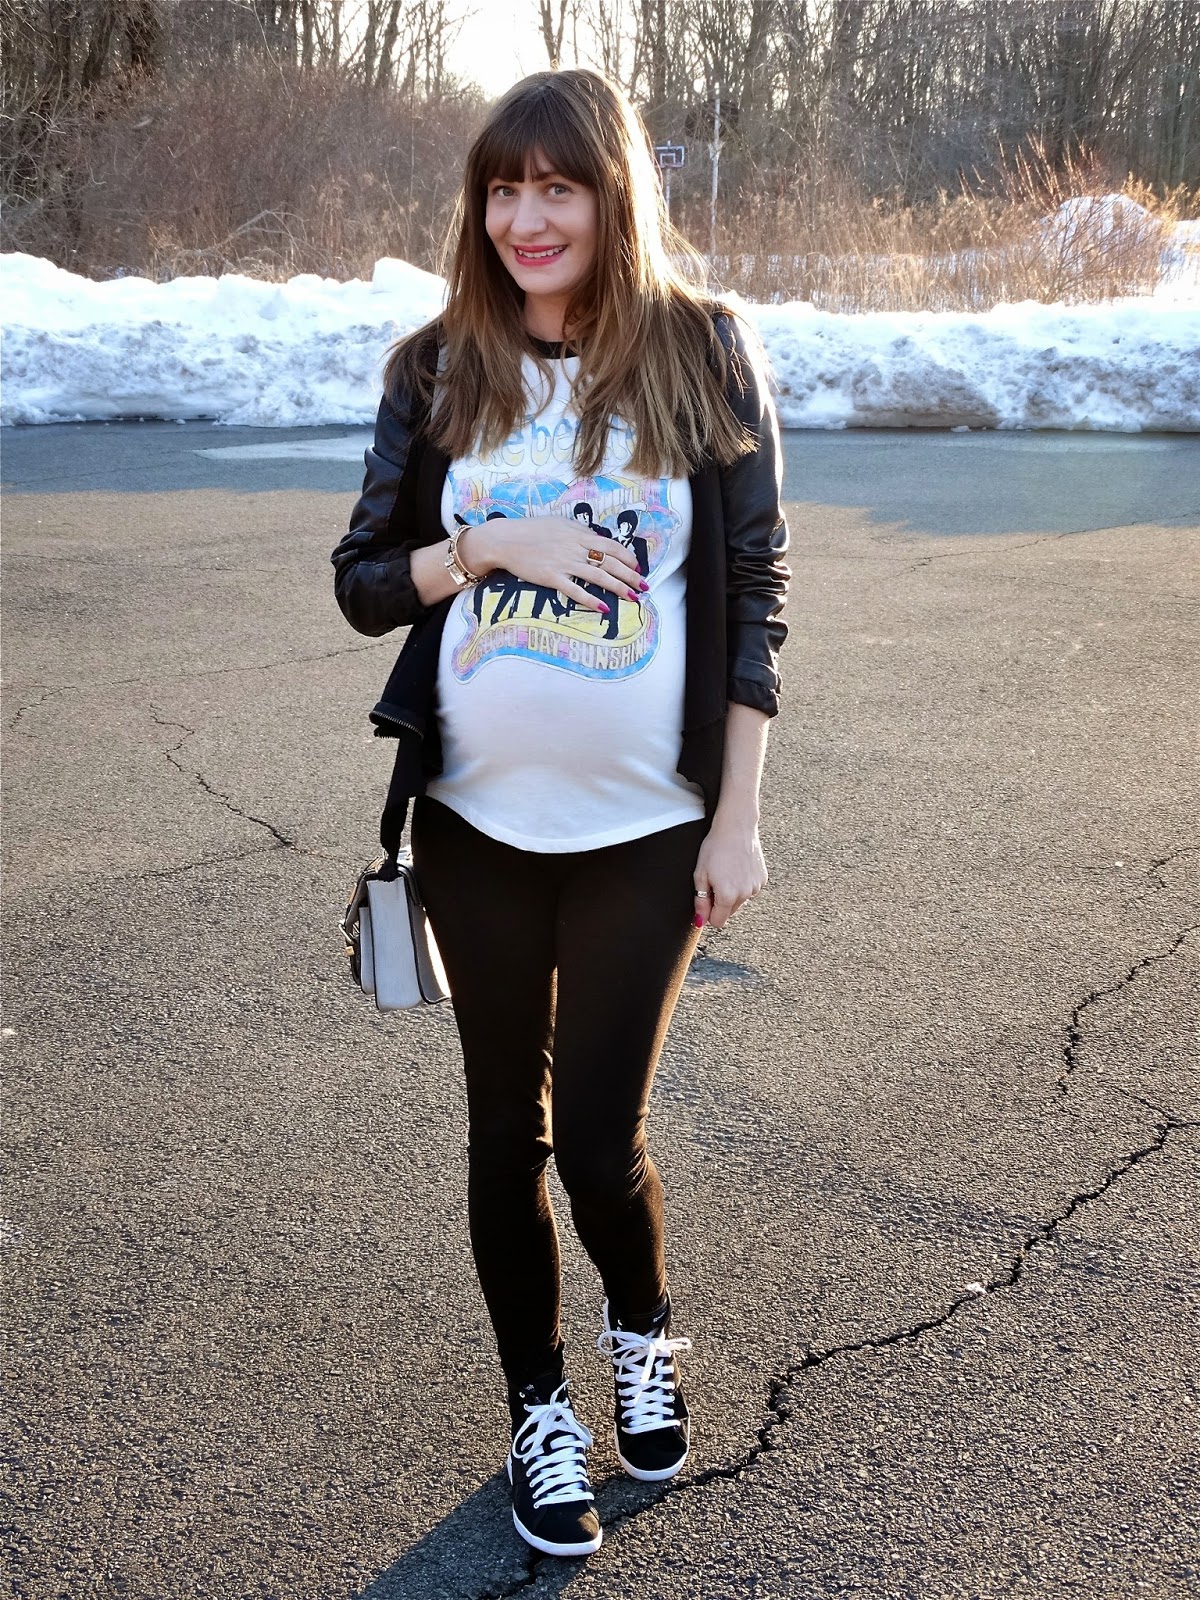 Maternity Style post by mommy blogger House Of Jeffers | www.houseofjeffers.com